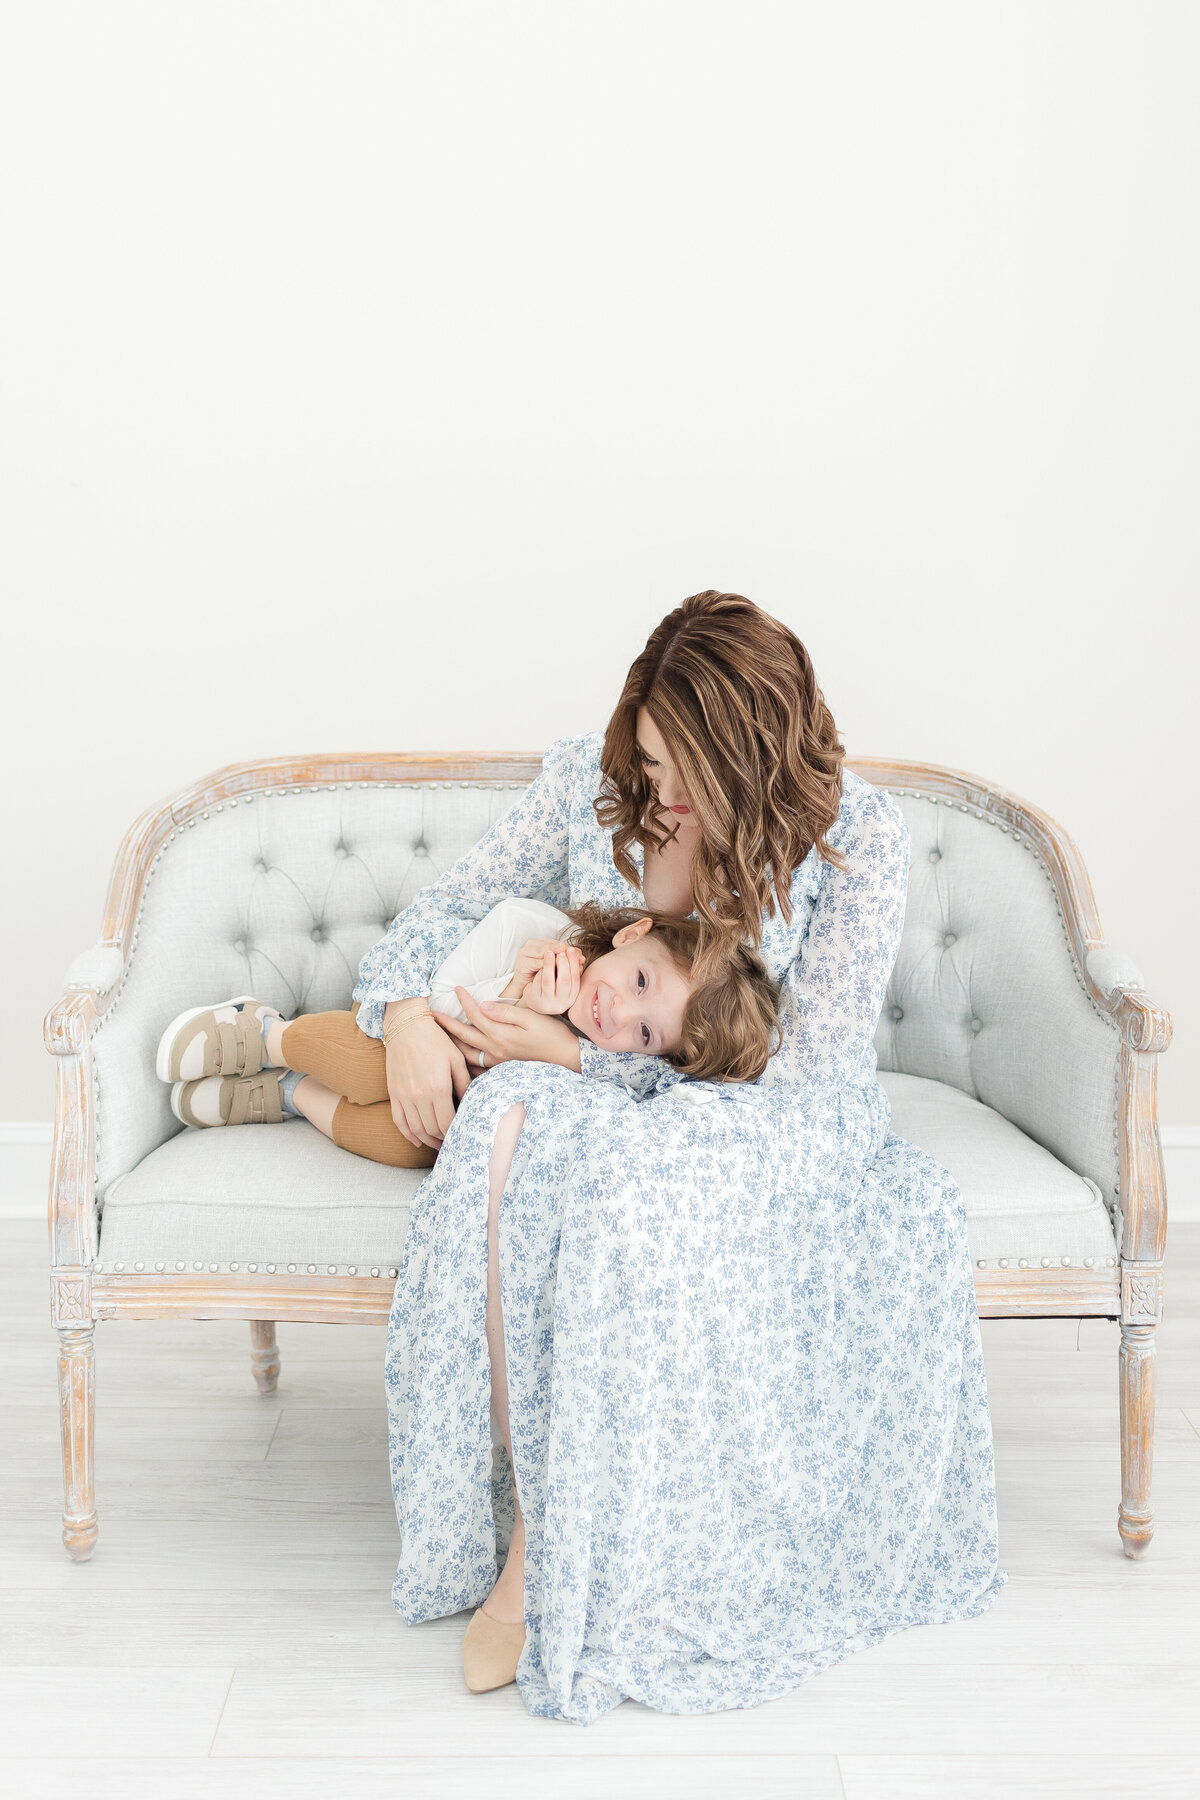 A mother snuggling with her young son on a bench wearing a blue dress in our Northern Virginia Newborn Photography studio